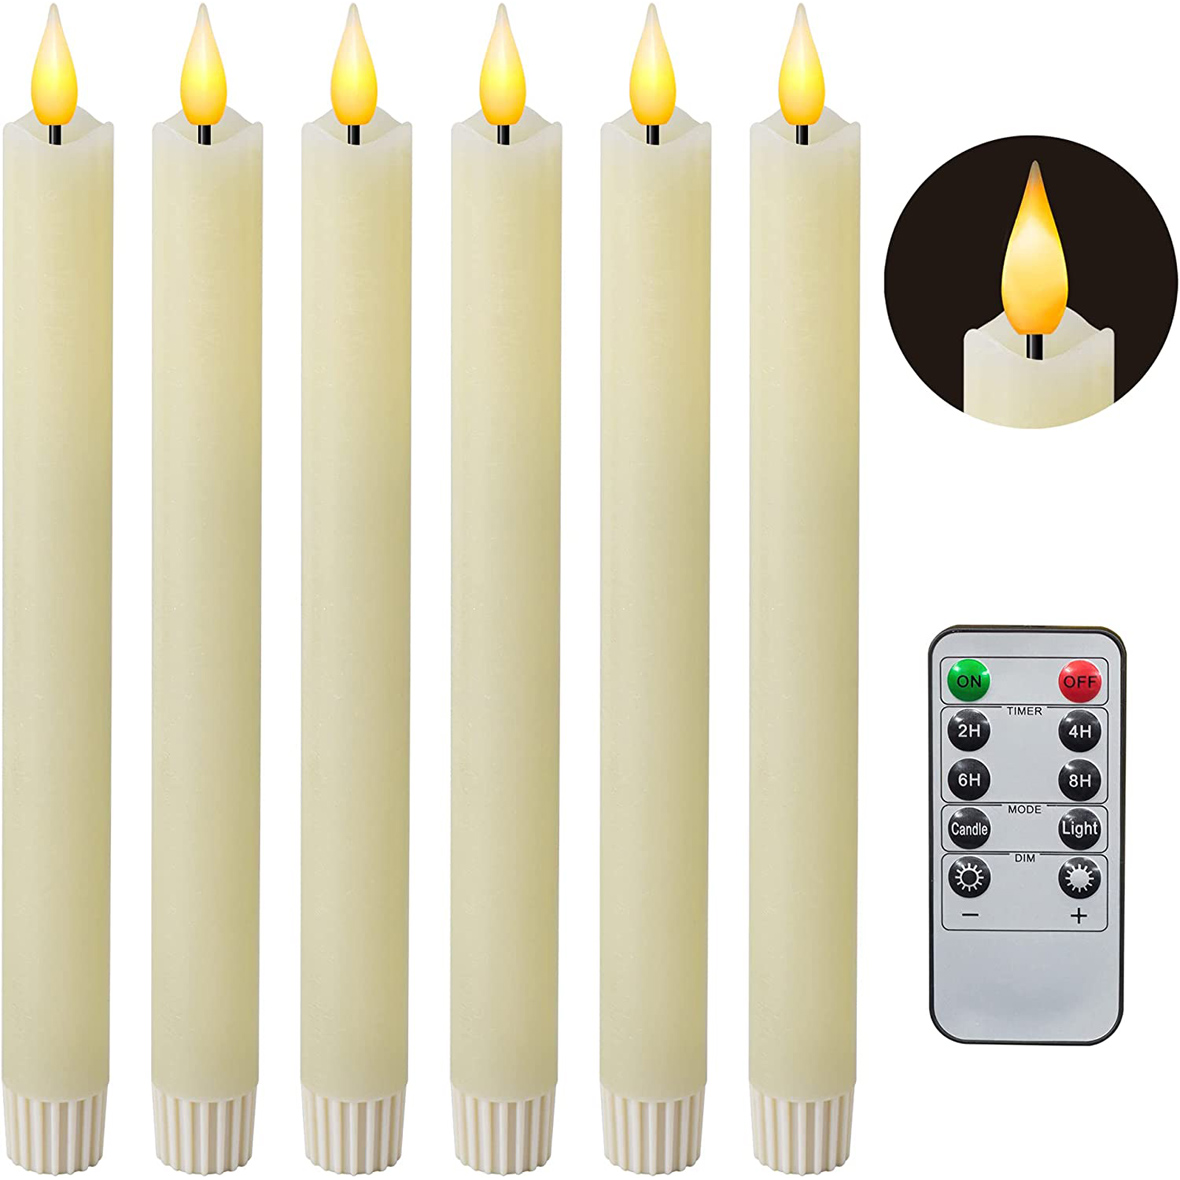 Yongmao Flameless Taper Candles Flickering Battery Operated with 10-Key Remote, Real Wax LED Window Candles Fake Electric Candles 3D Wick Warm Light Pack of 6 for Christmas Home Wedding Decor (Ivory)